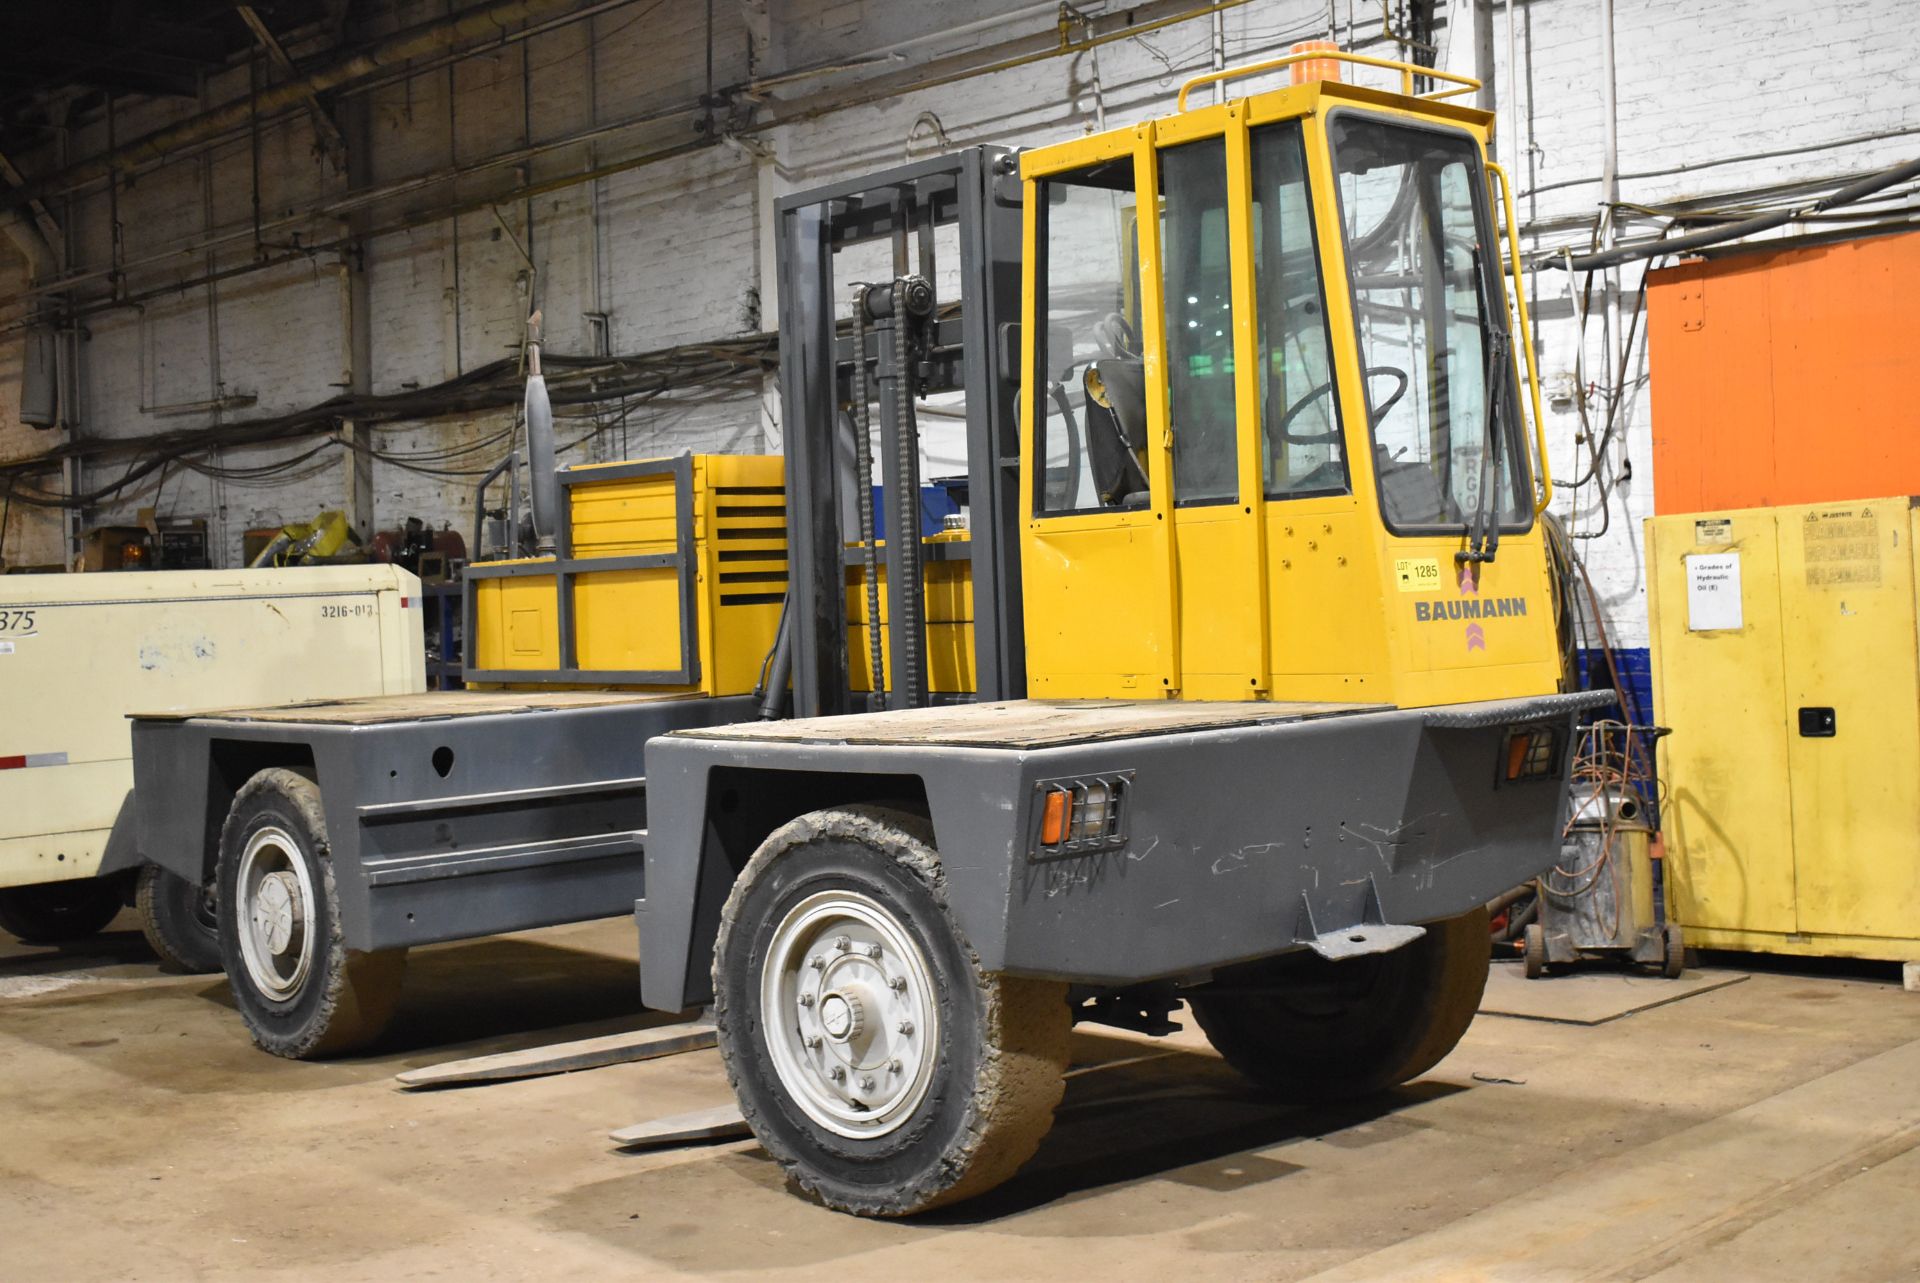 BAUMANN AS60/12/40 13,600 LB. CAPACITY DIESEL SIDE LOADER FORKLIFT WITH 60" MAX. LIFT HEIGHT, SINGLE